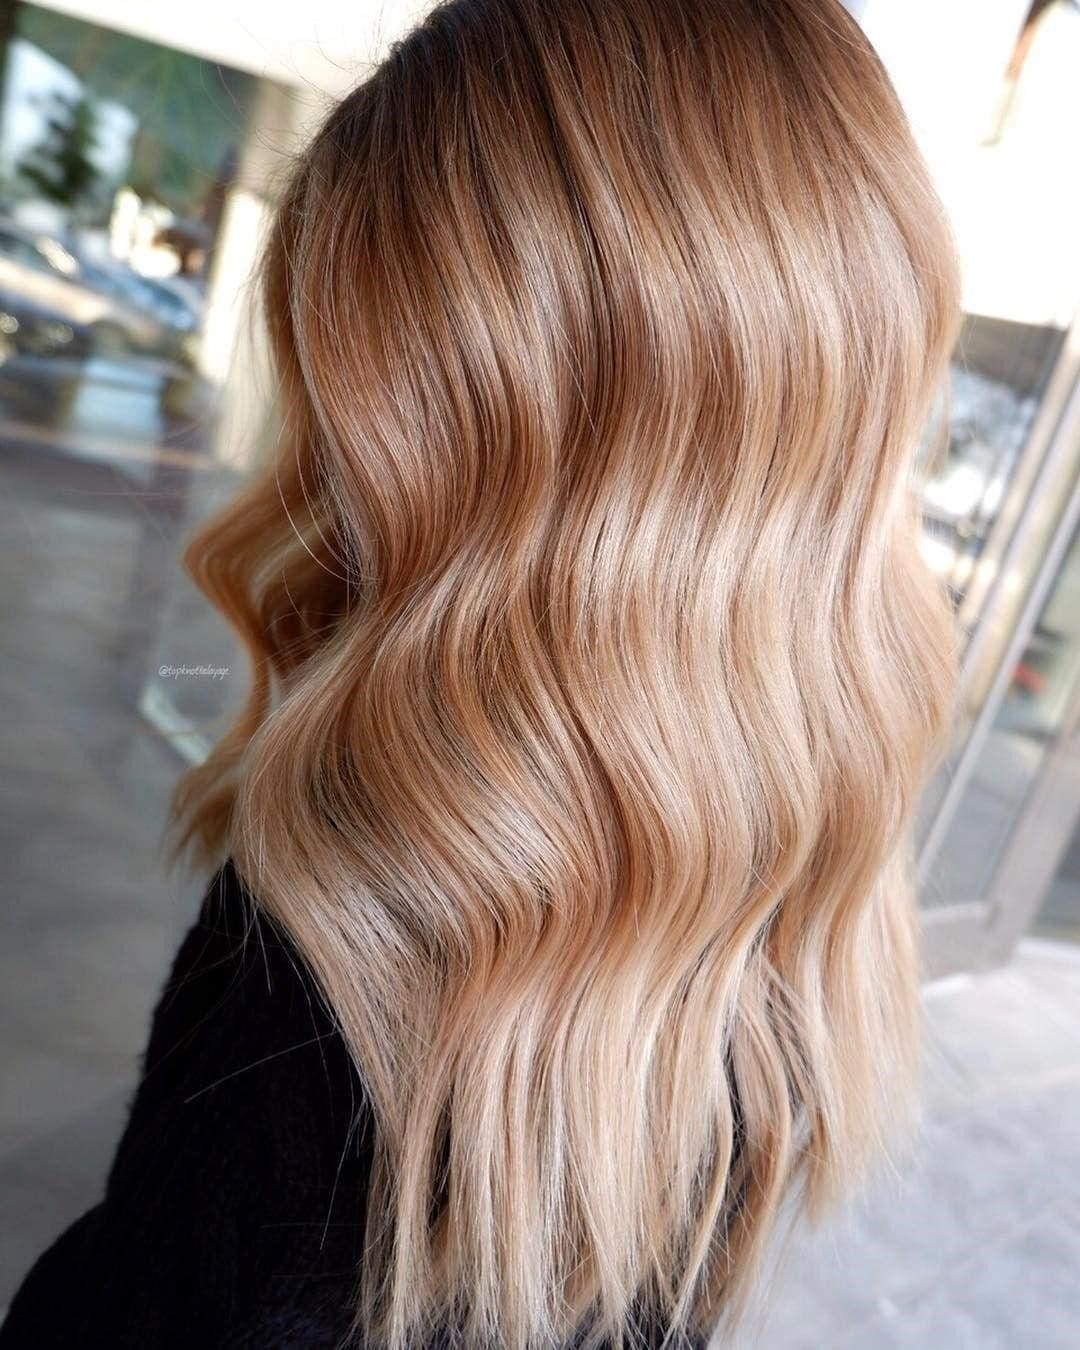 10 Strawberry Blonde Hair Everyone Want To Copy | ManipalBlog